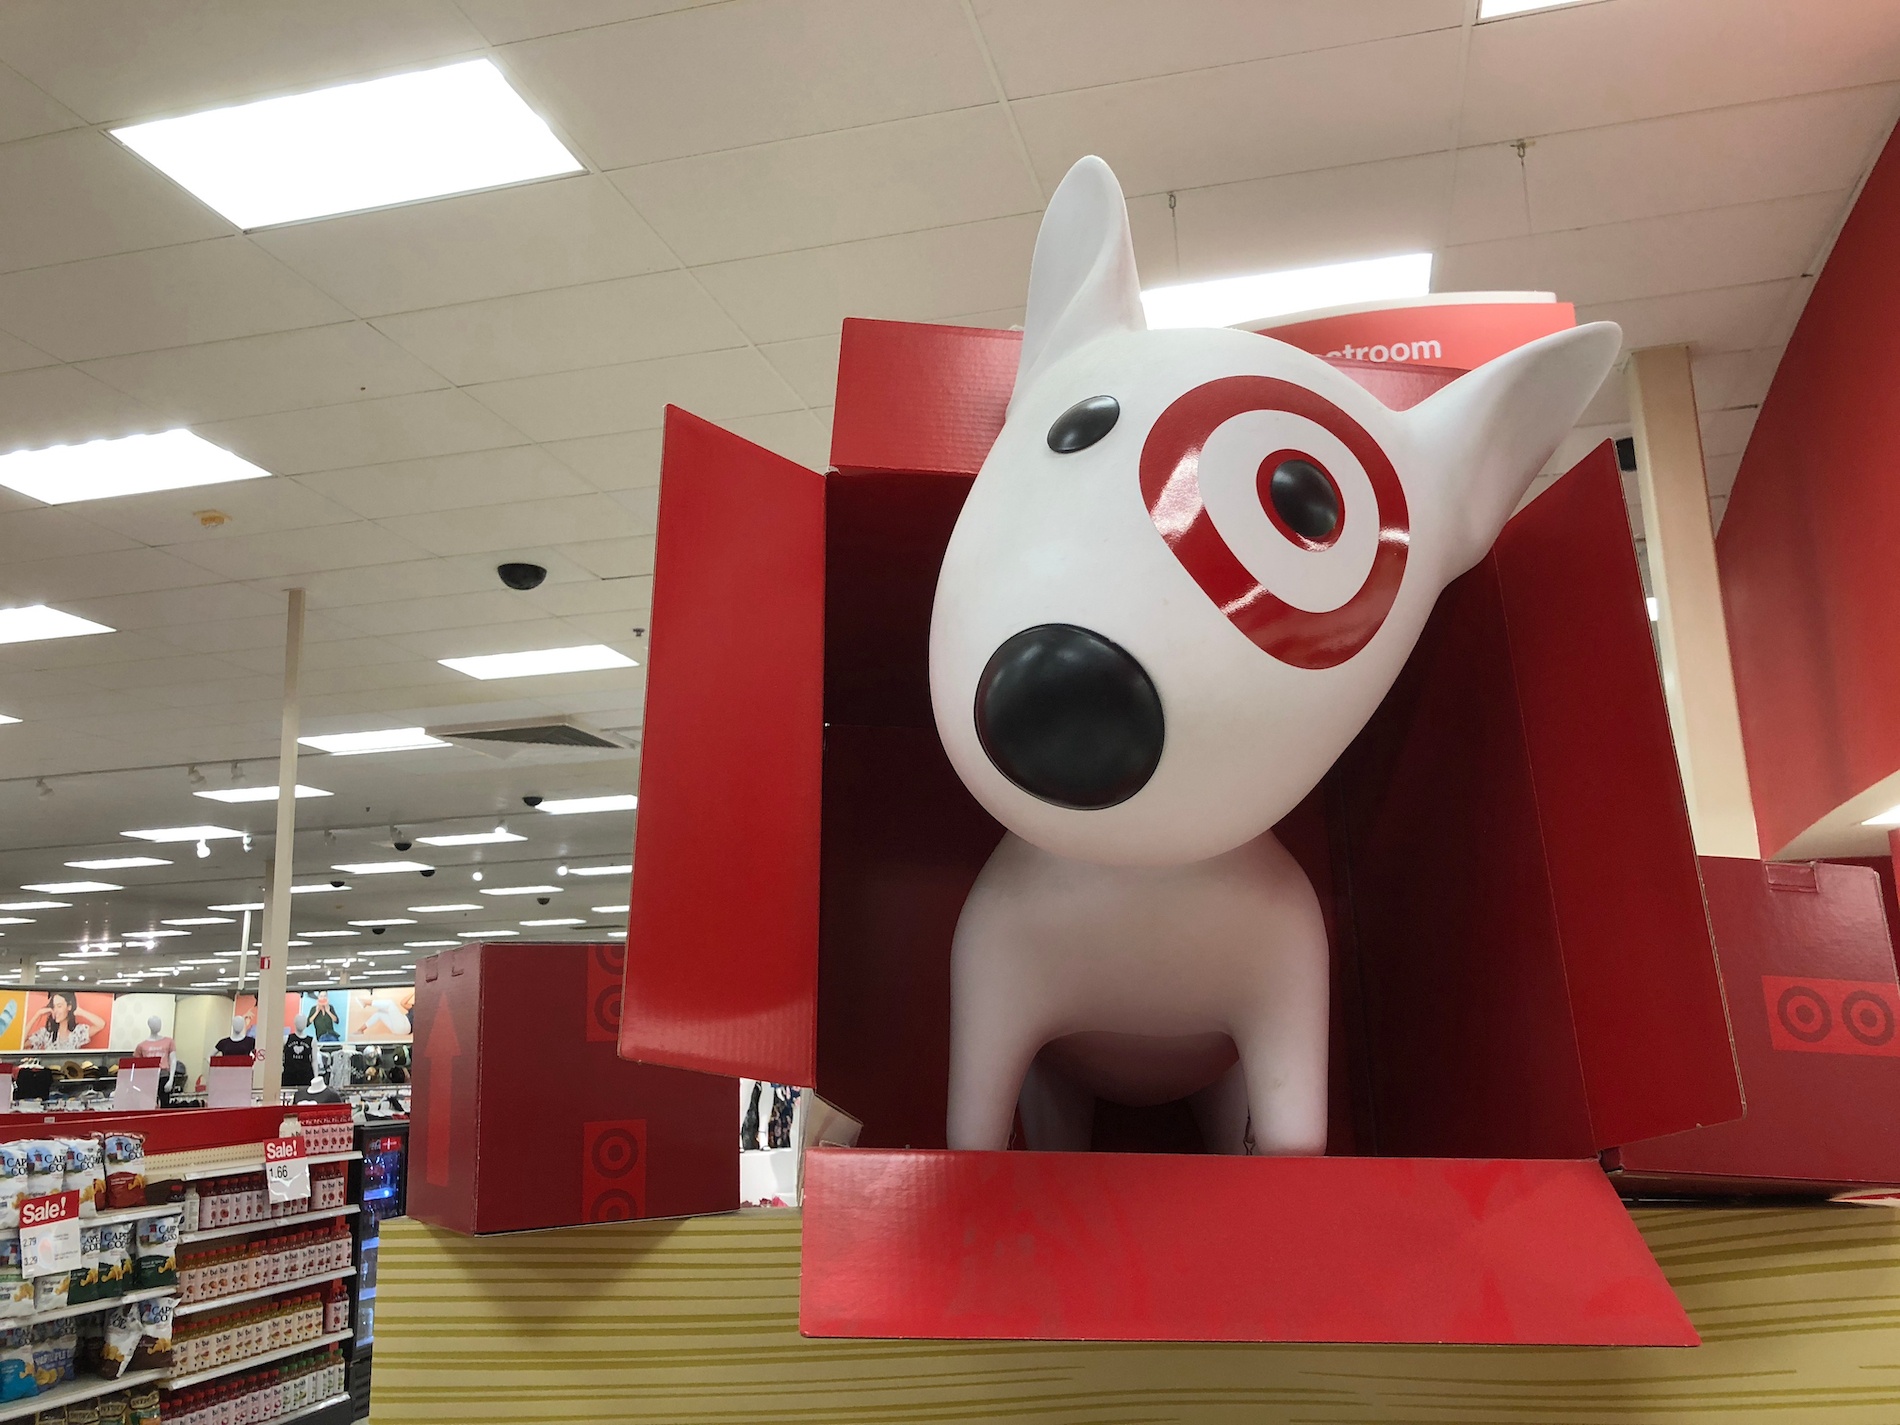 There's an Australian Store Called Target That Has Nothing to Do